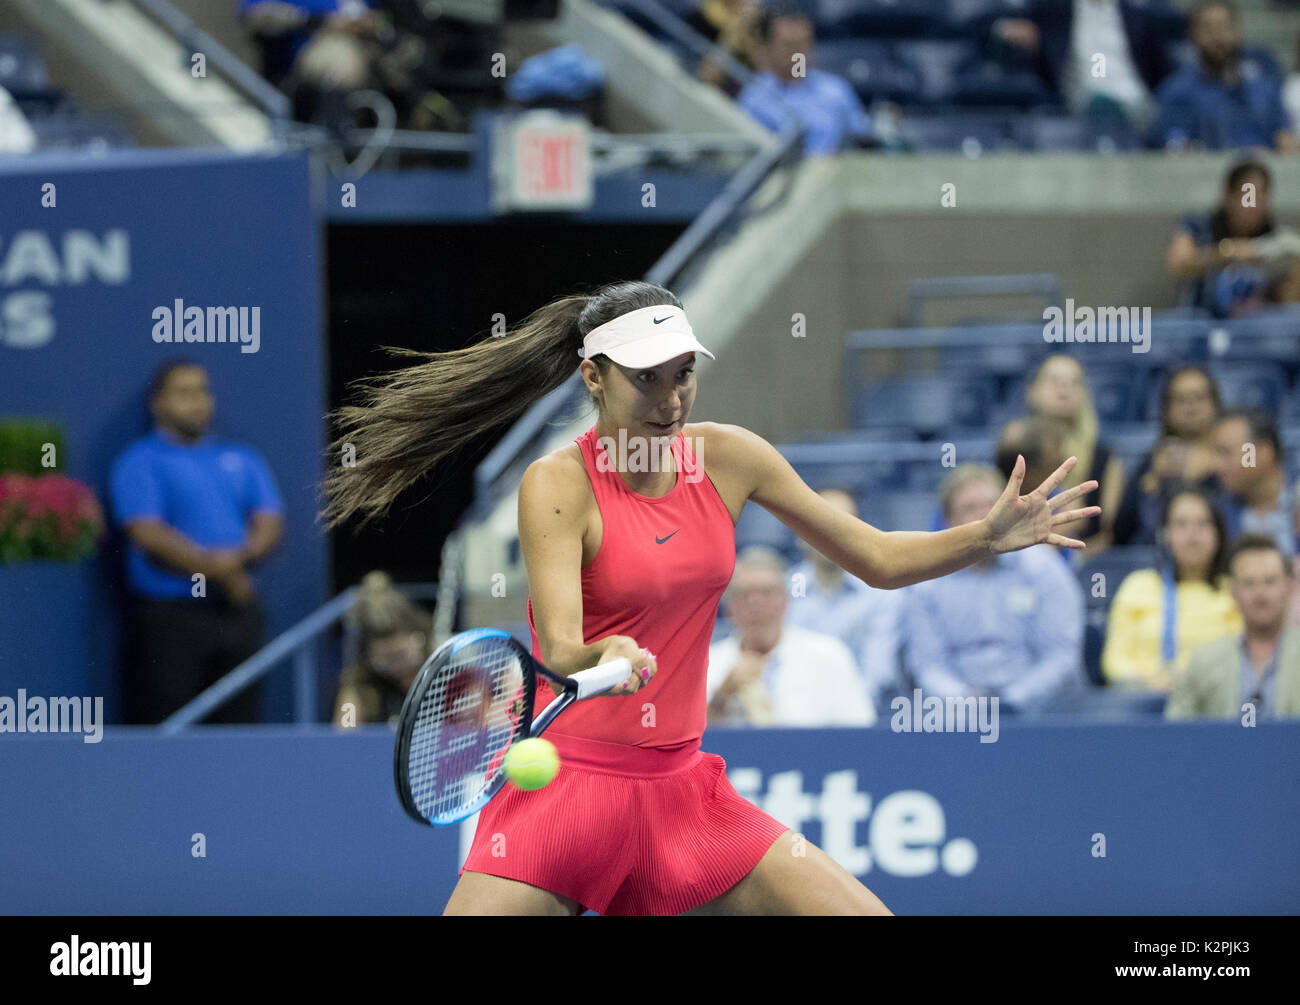 New York, United States. 30th Aug, 2017. New York, NY USA - August 30, 2017: Oceane Dodin of France returns ball during match against Venus Williams of USA at US Open Championships at Billie Jean King National Tennis Center Credit: lev radin/Alamy Live News Stock Photo